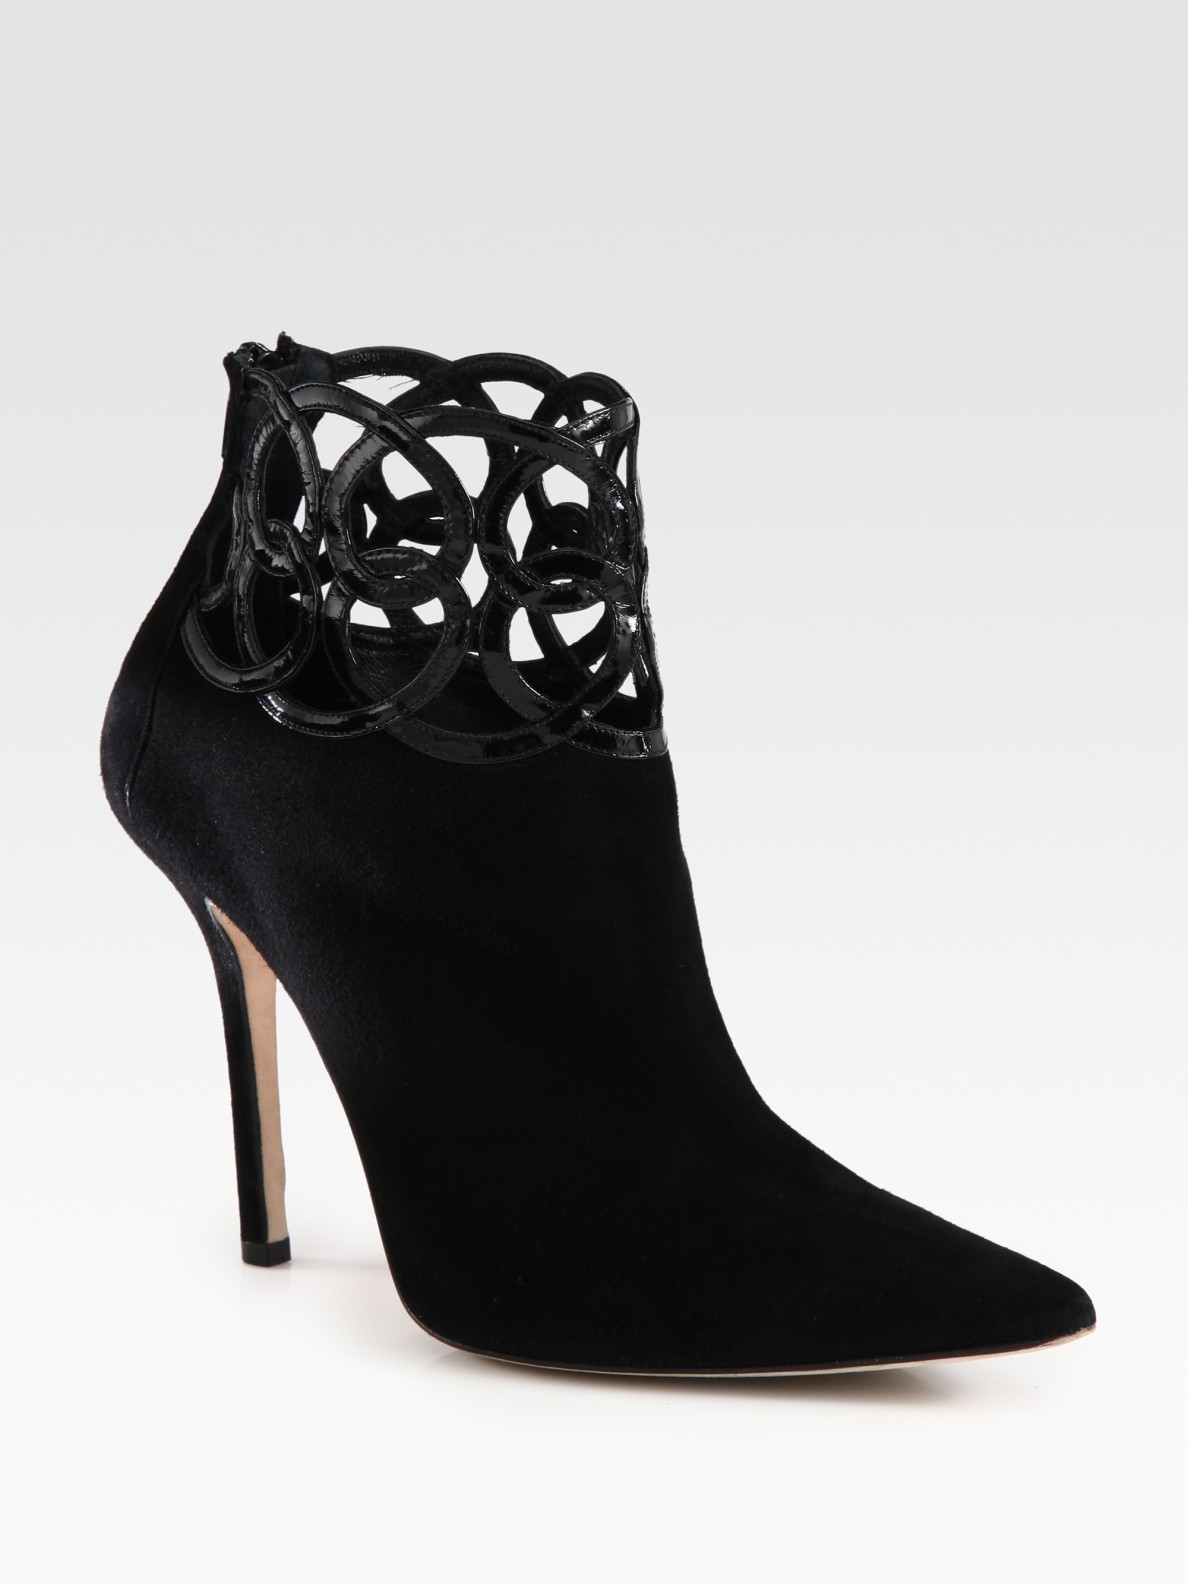 Lyst - Oscar De La Renta Suede and Patent Leather Ankle Boots in Black